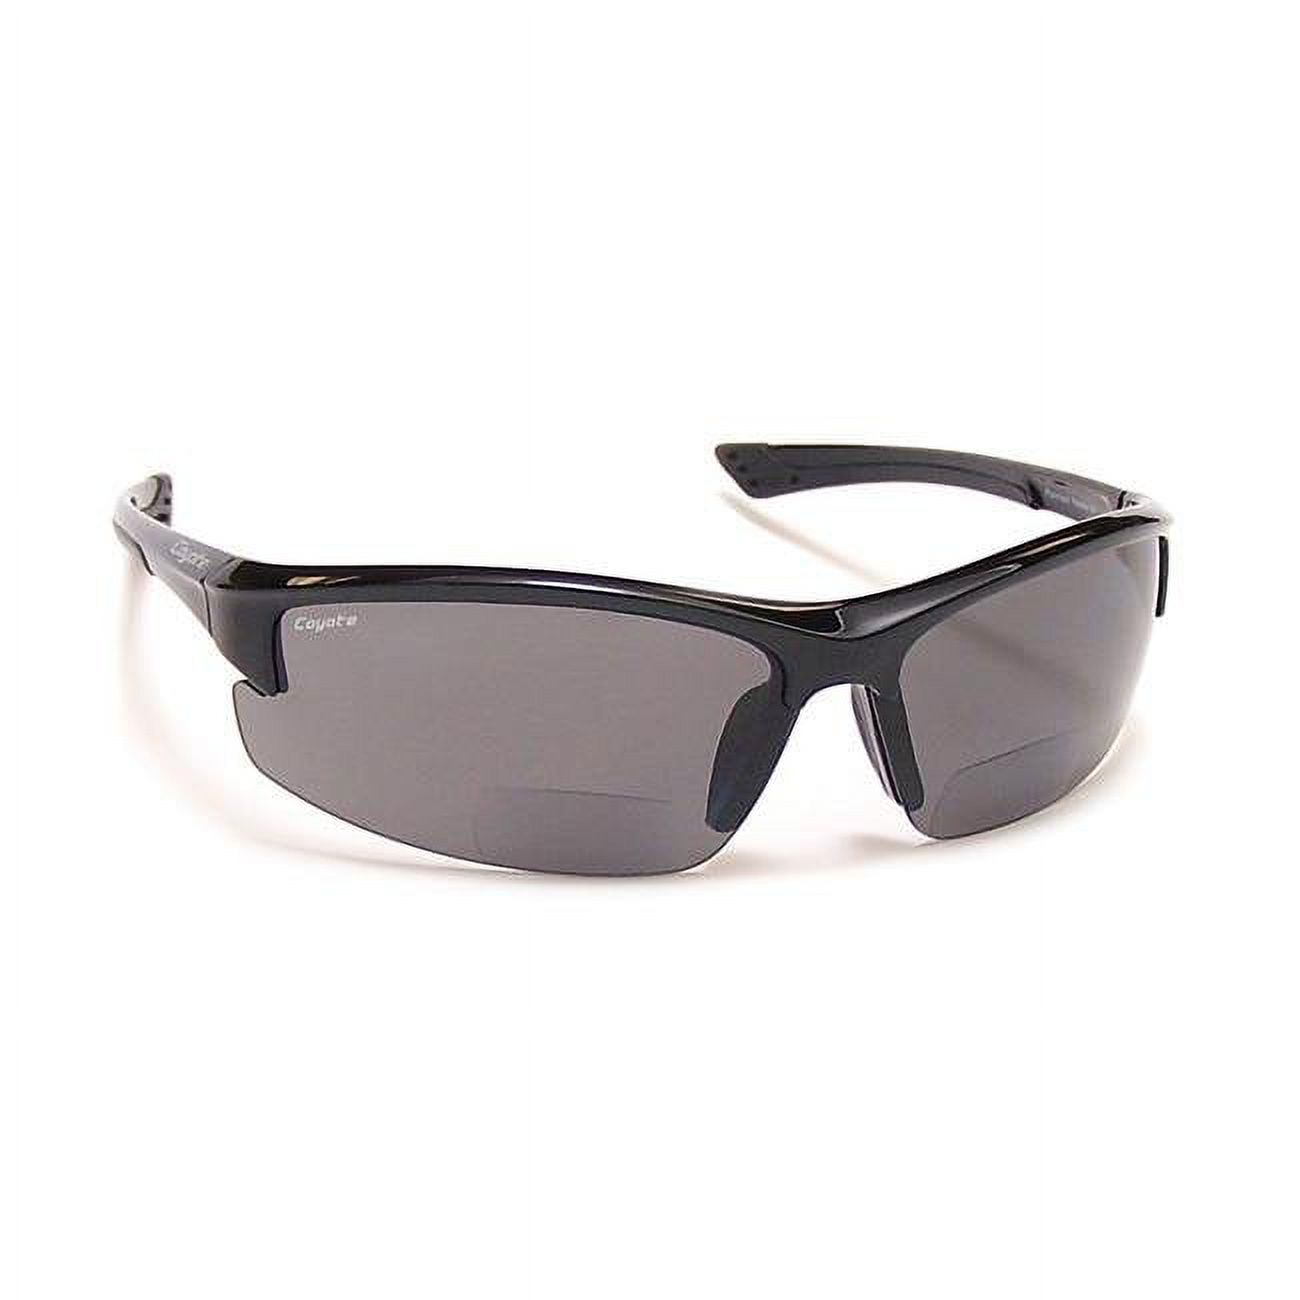 Coyote Bp-7 +2.50 Polarized Bifocal Safety Reader Black/Gray Sunglasses - image 1 of 4